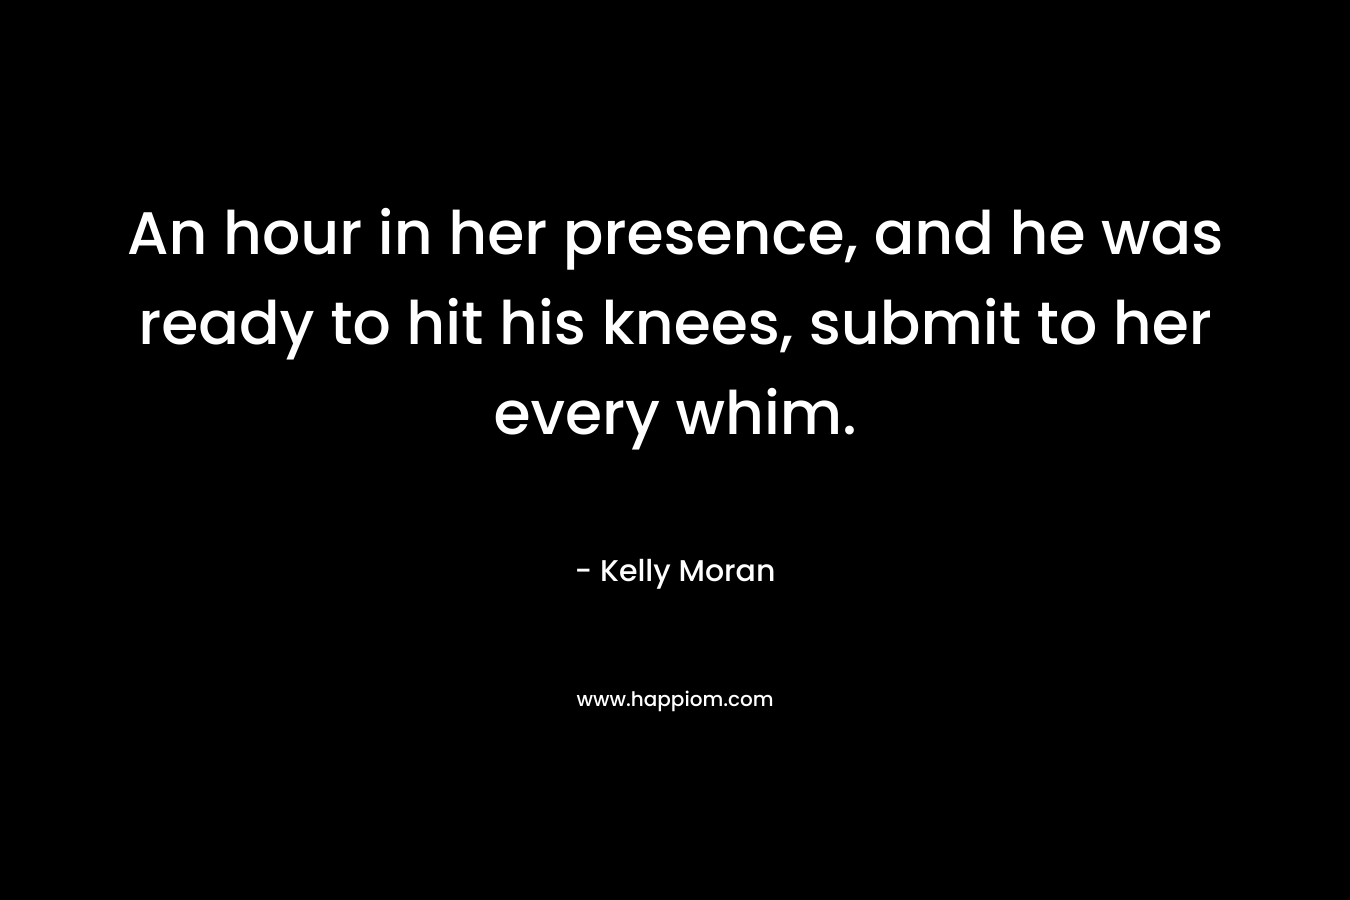 An hour in her presence, and he was ready to hit his knees, submit to her every whim.